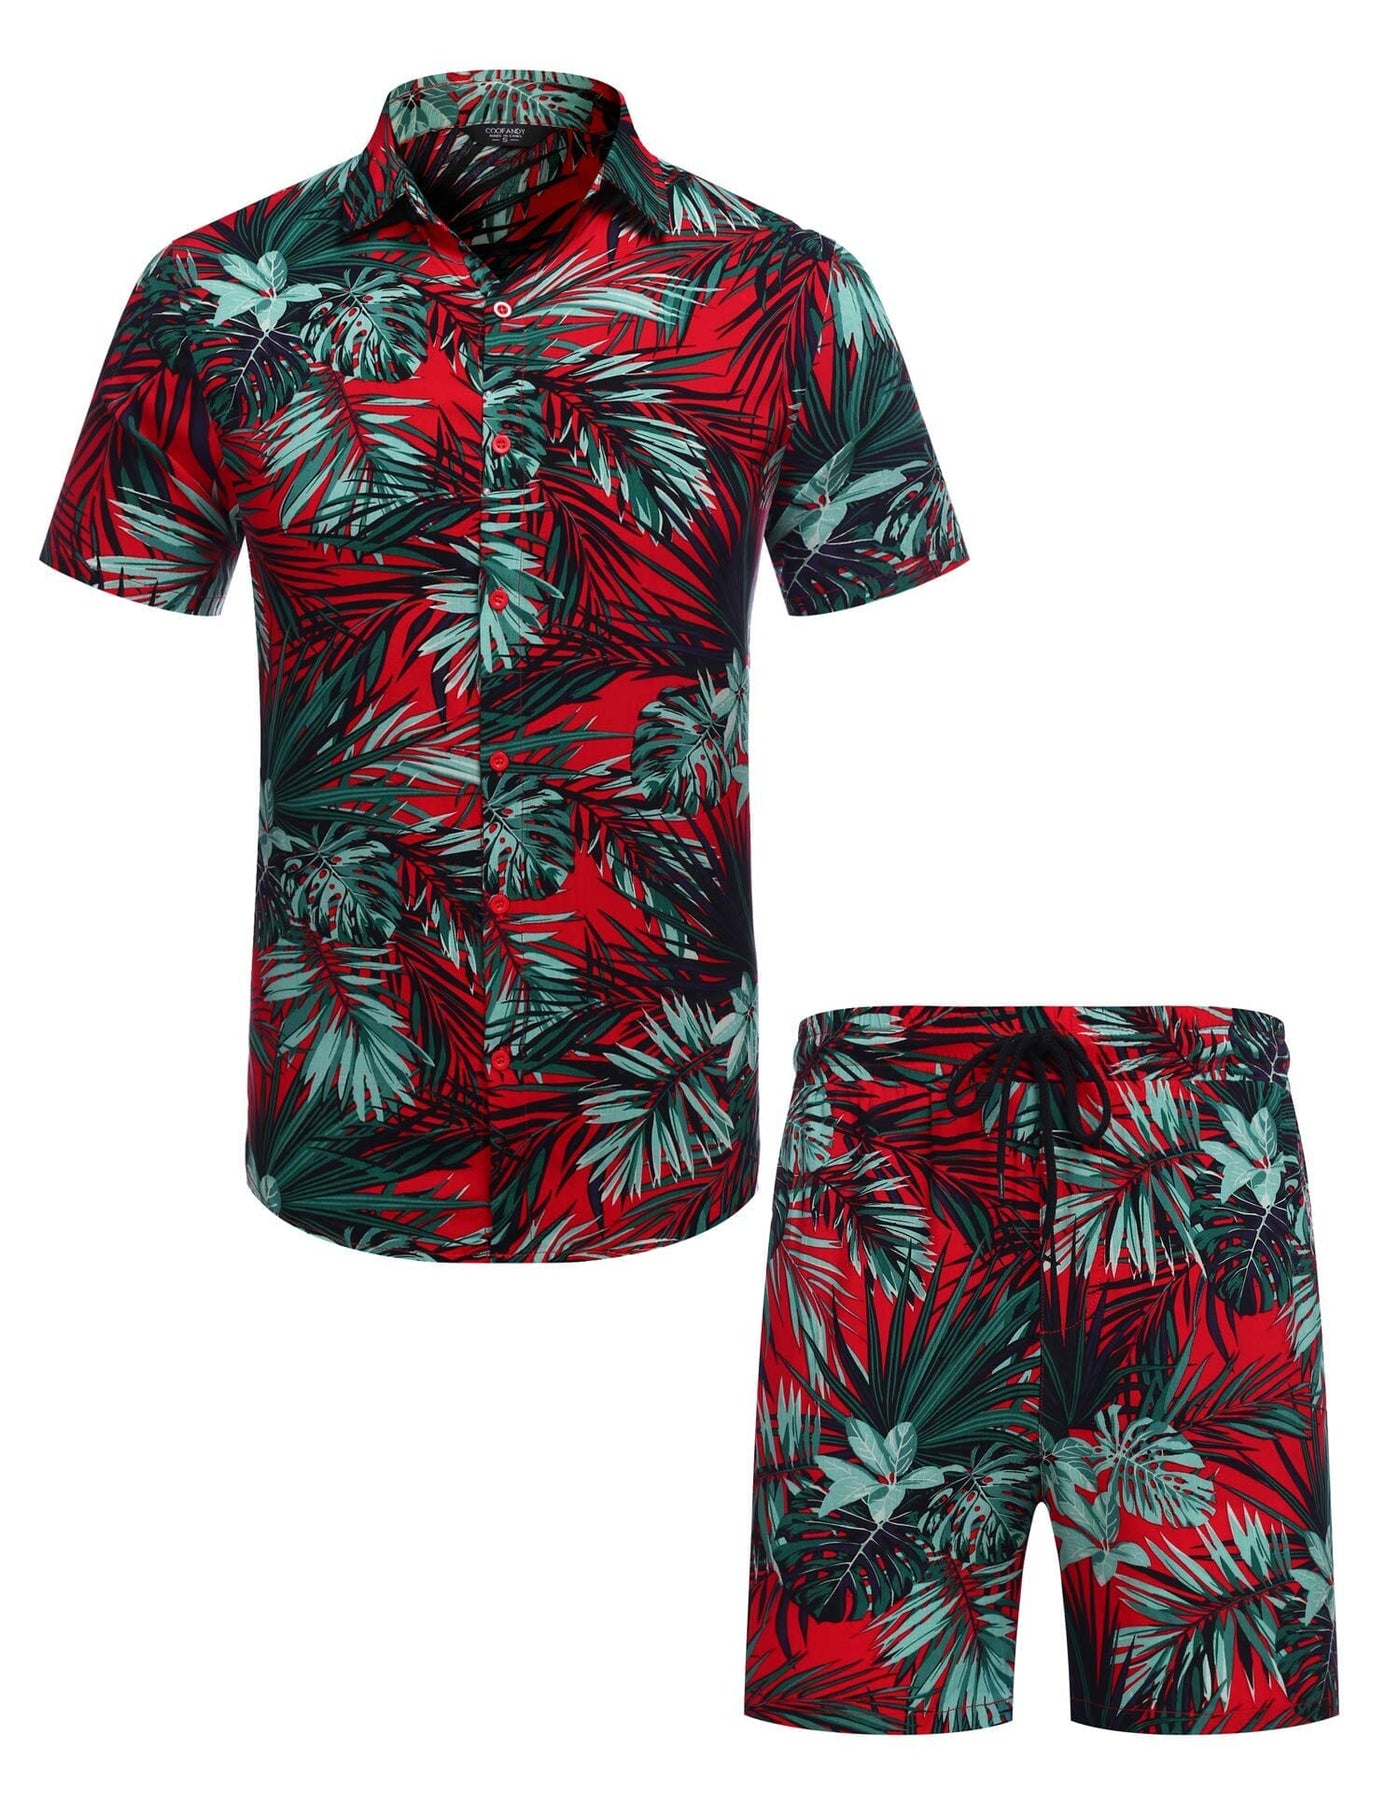 Coofandy Floral Hawaiian Sets (US Only) Sets coofandy Red Leaves S 